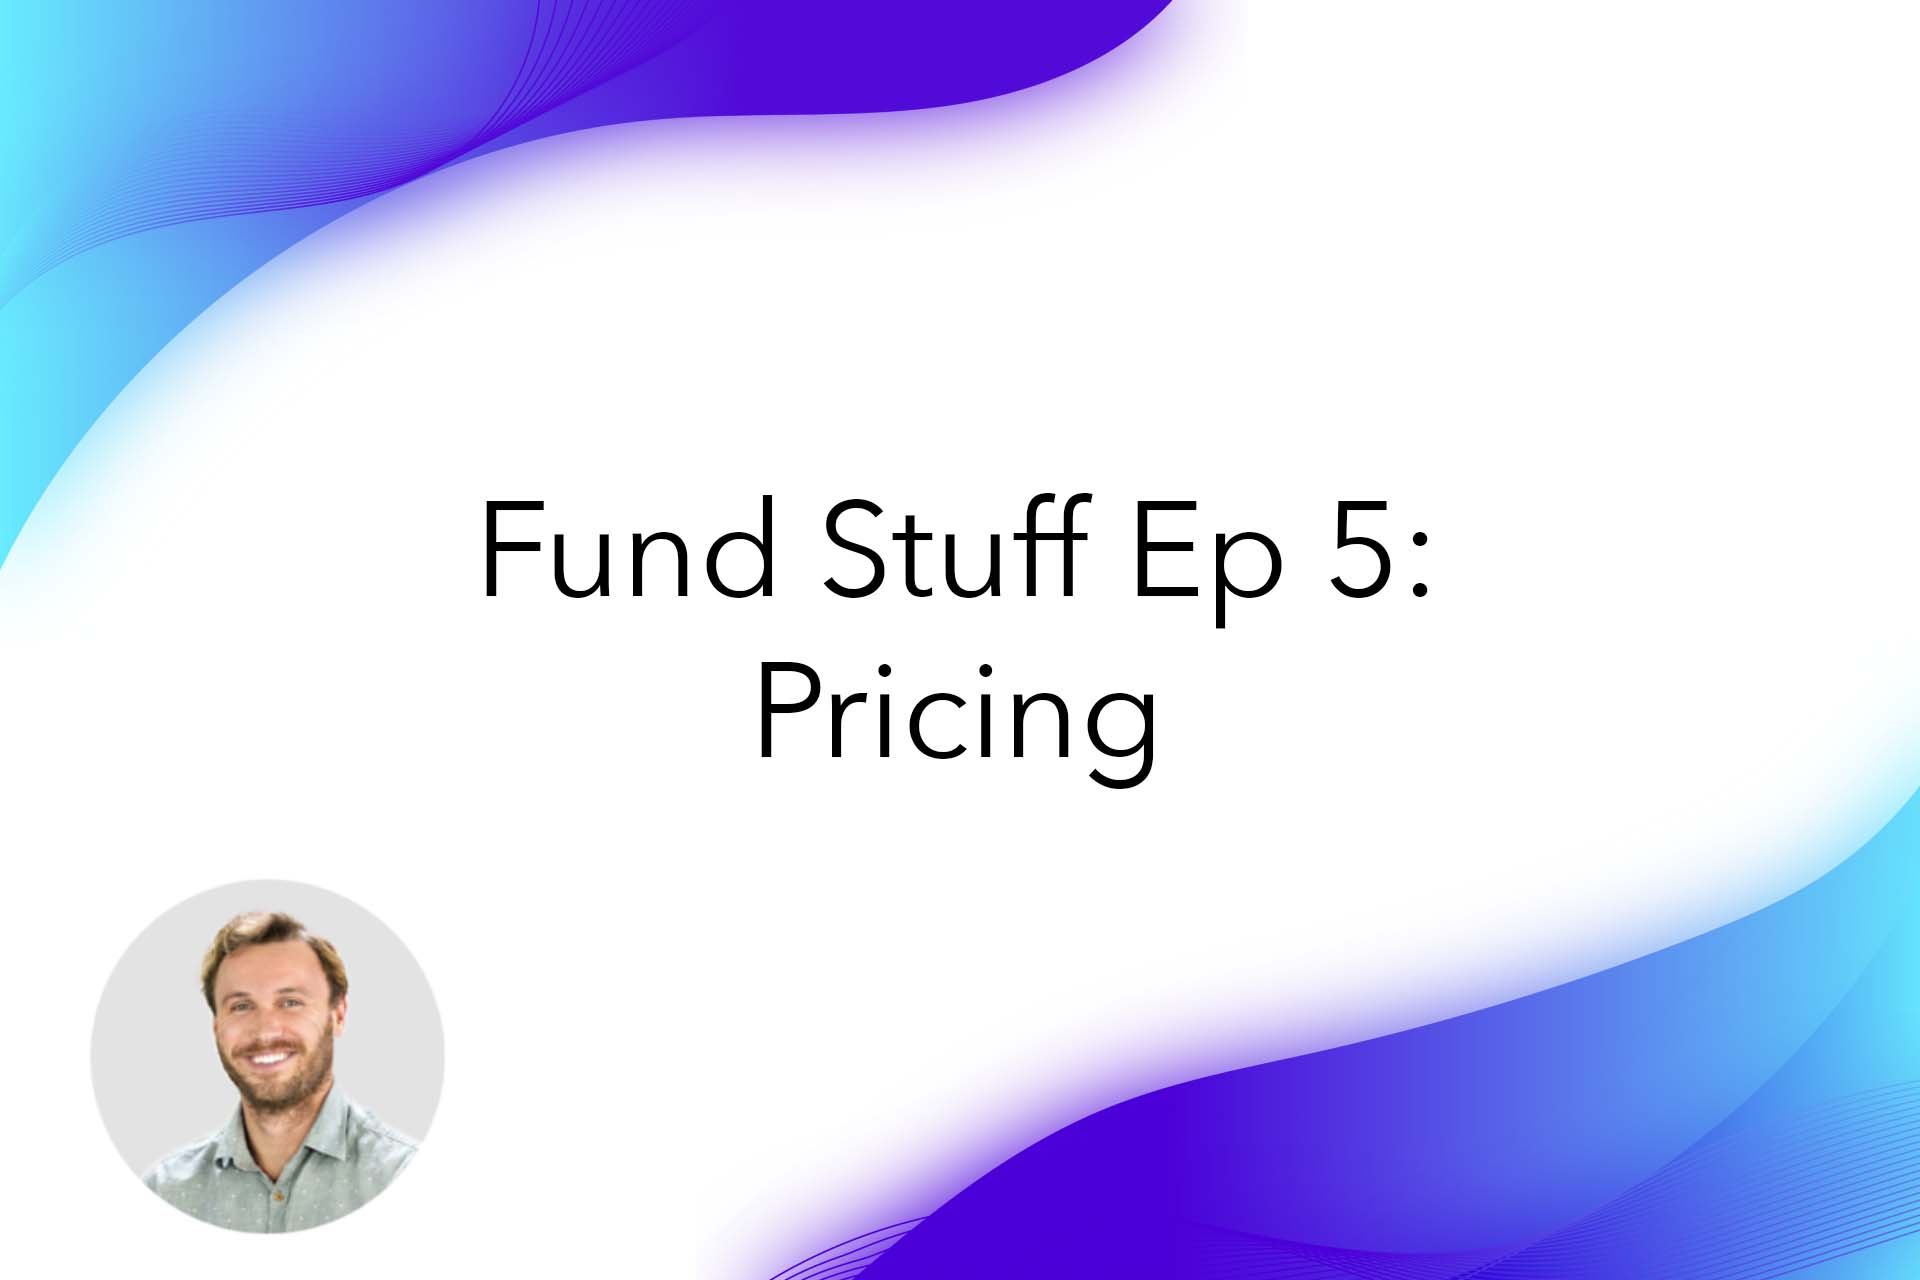 Fund Stuff Episode 5 - Pricing with Nick Duncan